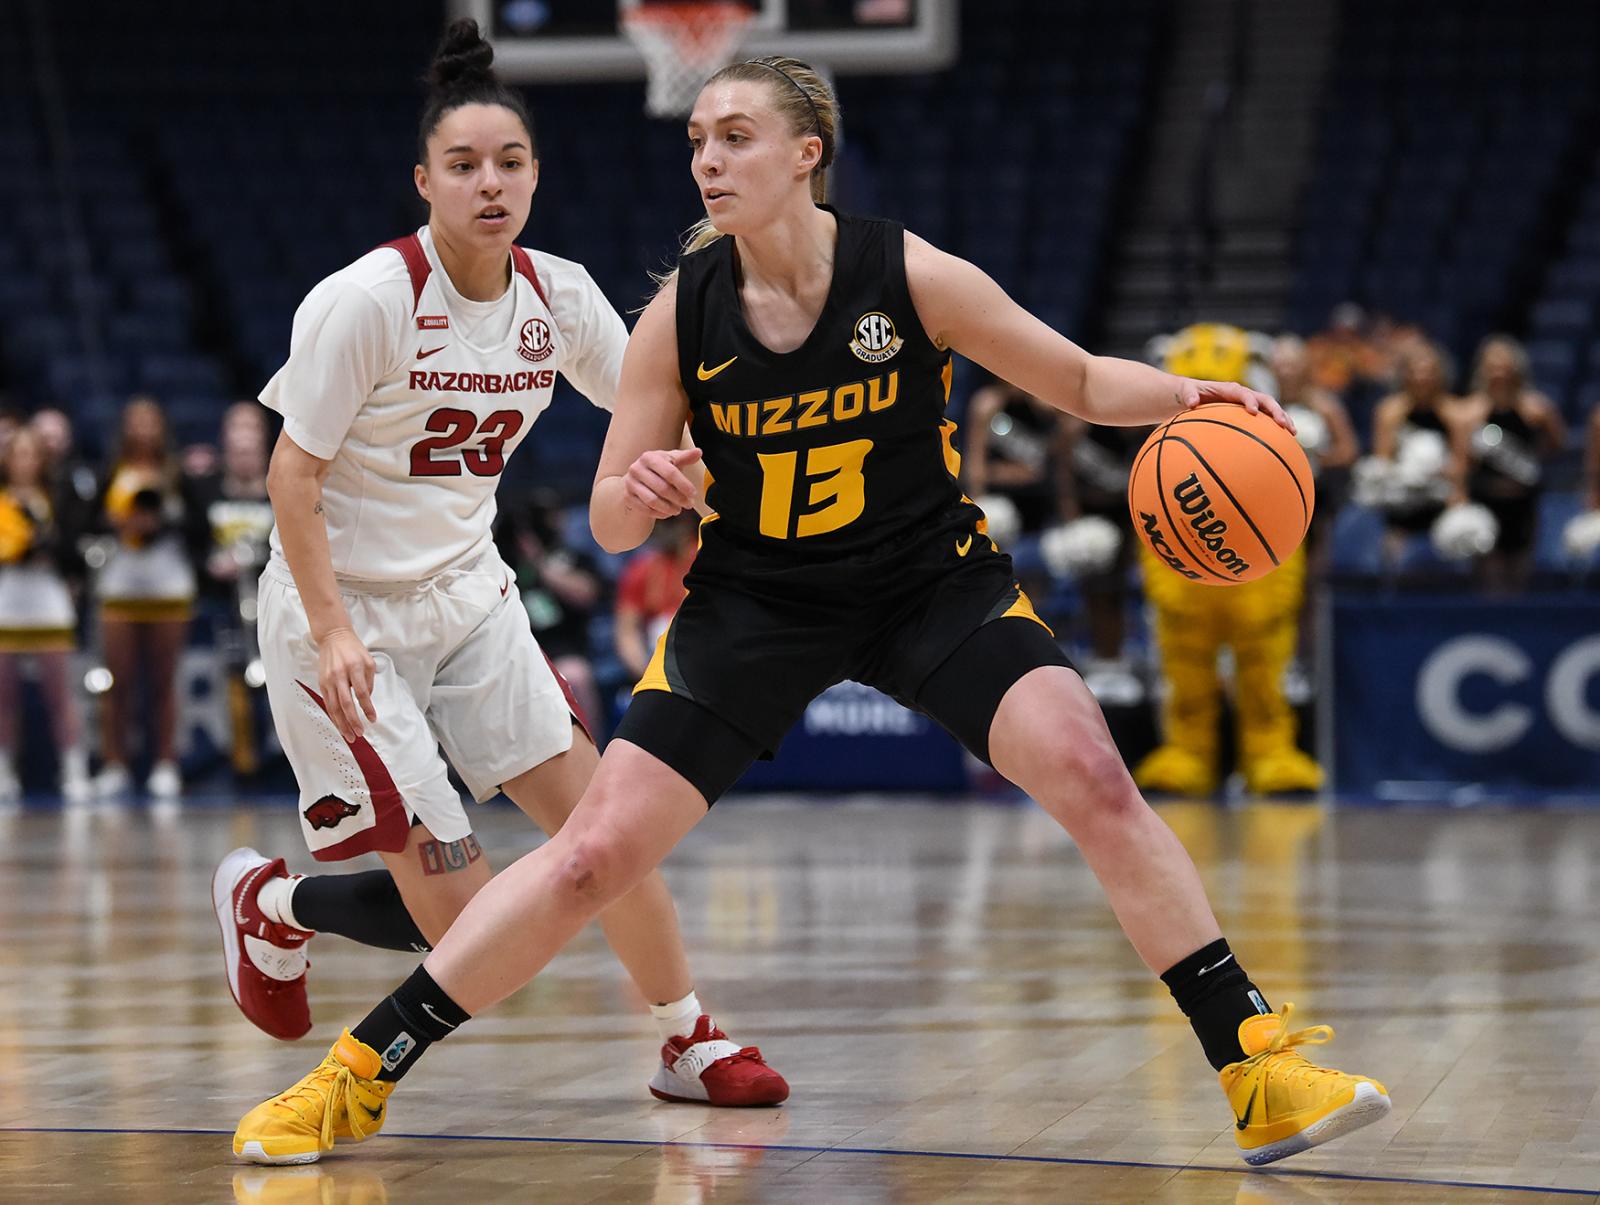 Haley Troup dribbles the ball on Thursday, March 3, 2022 at Bridgestone Arena in Nashville. Troup led all scorers with 21 points in the Tigers&#39; 61-52 loss in the second round of the SEC Tournament.